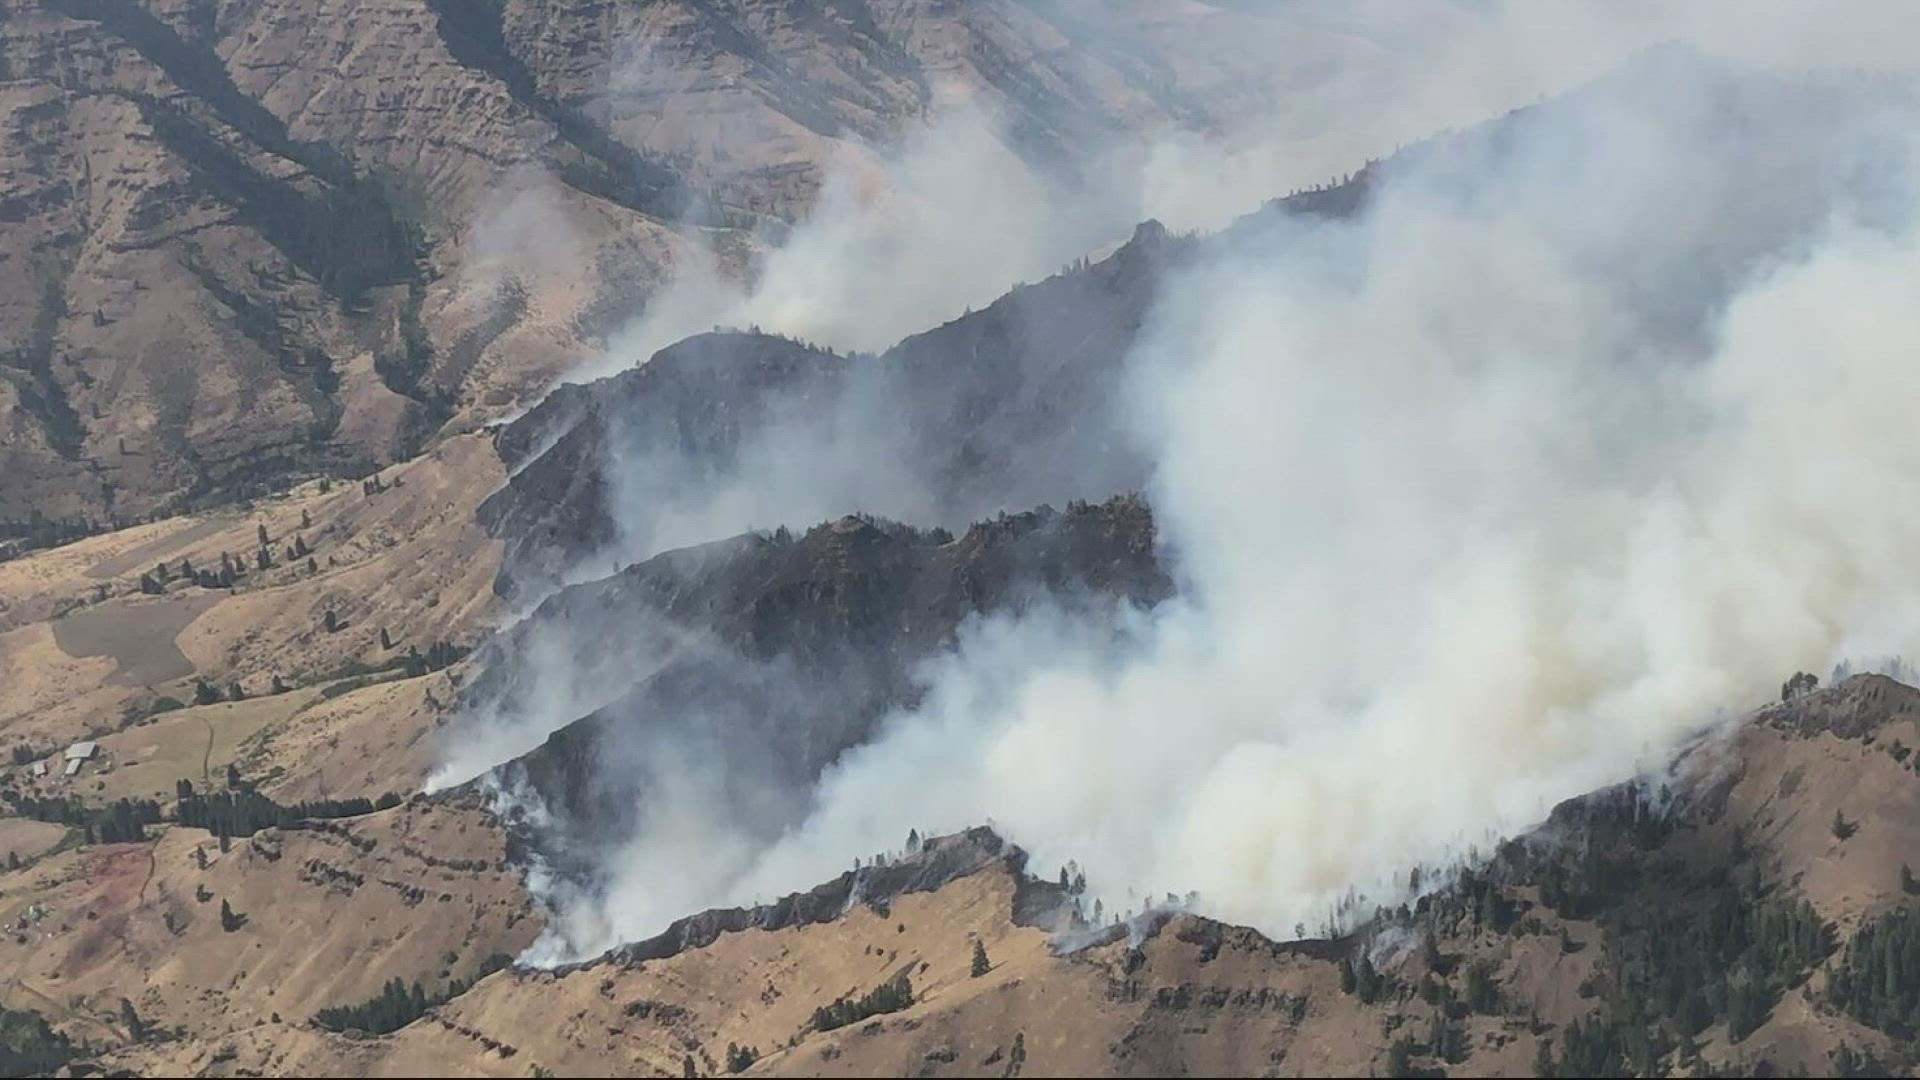 Double Creek Fire in Wallowa County in Northeast Oregon is threating structures and has forced evacuations while Rum Creek Fire continues to burn.